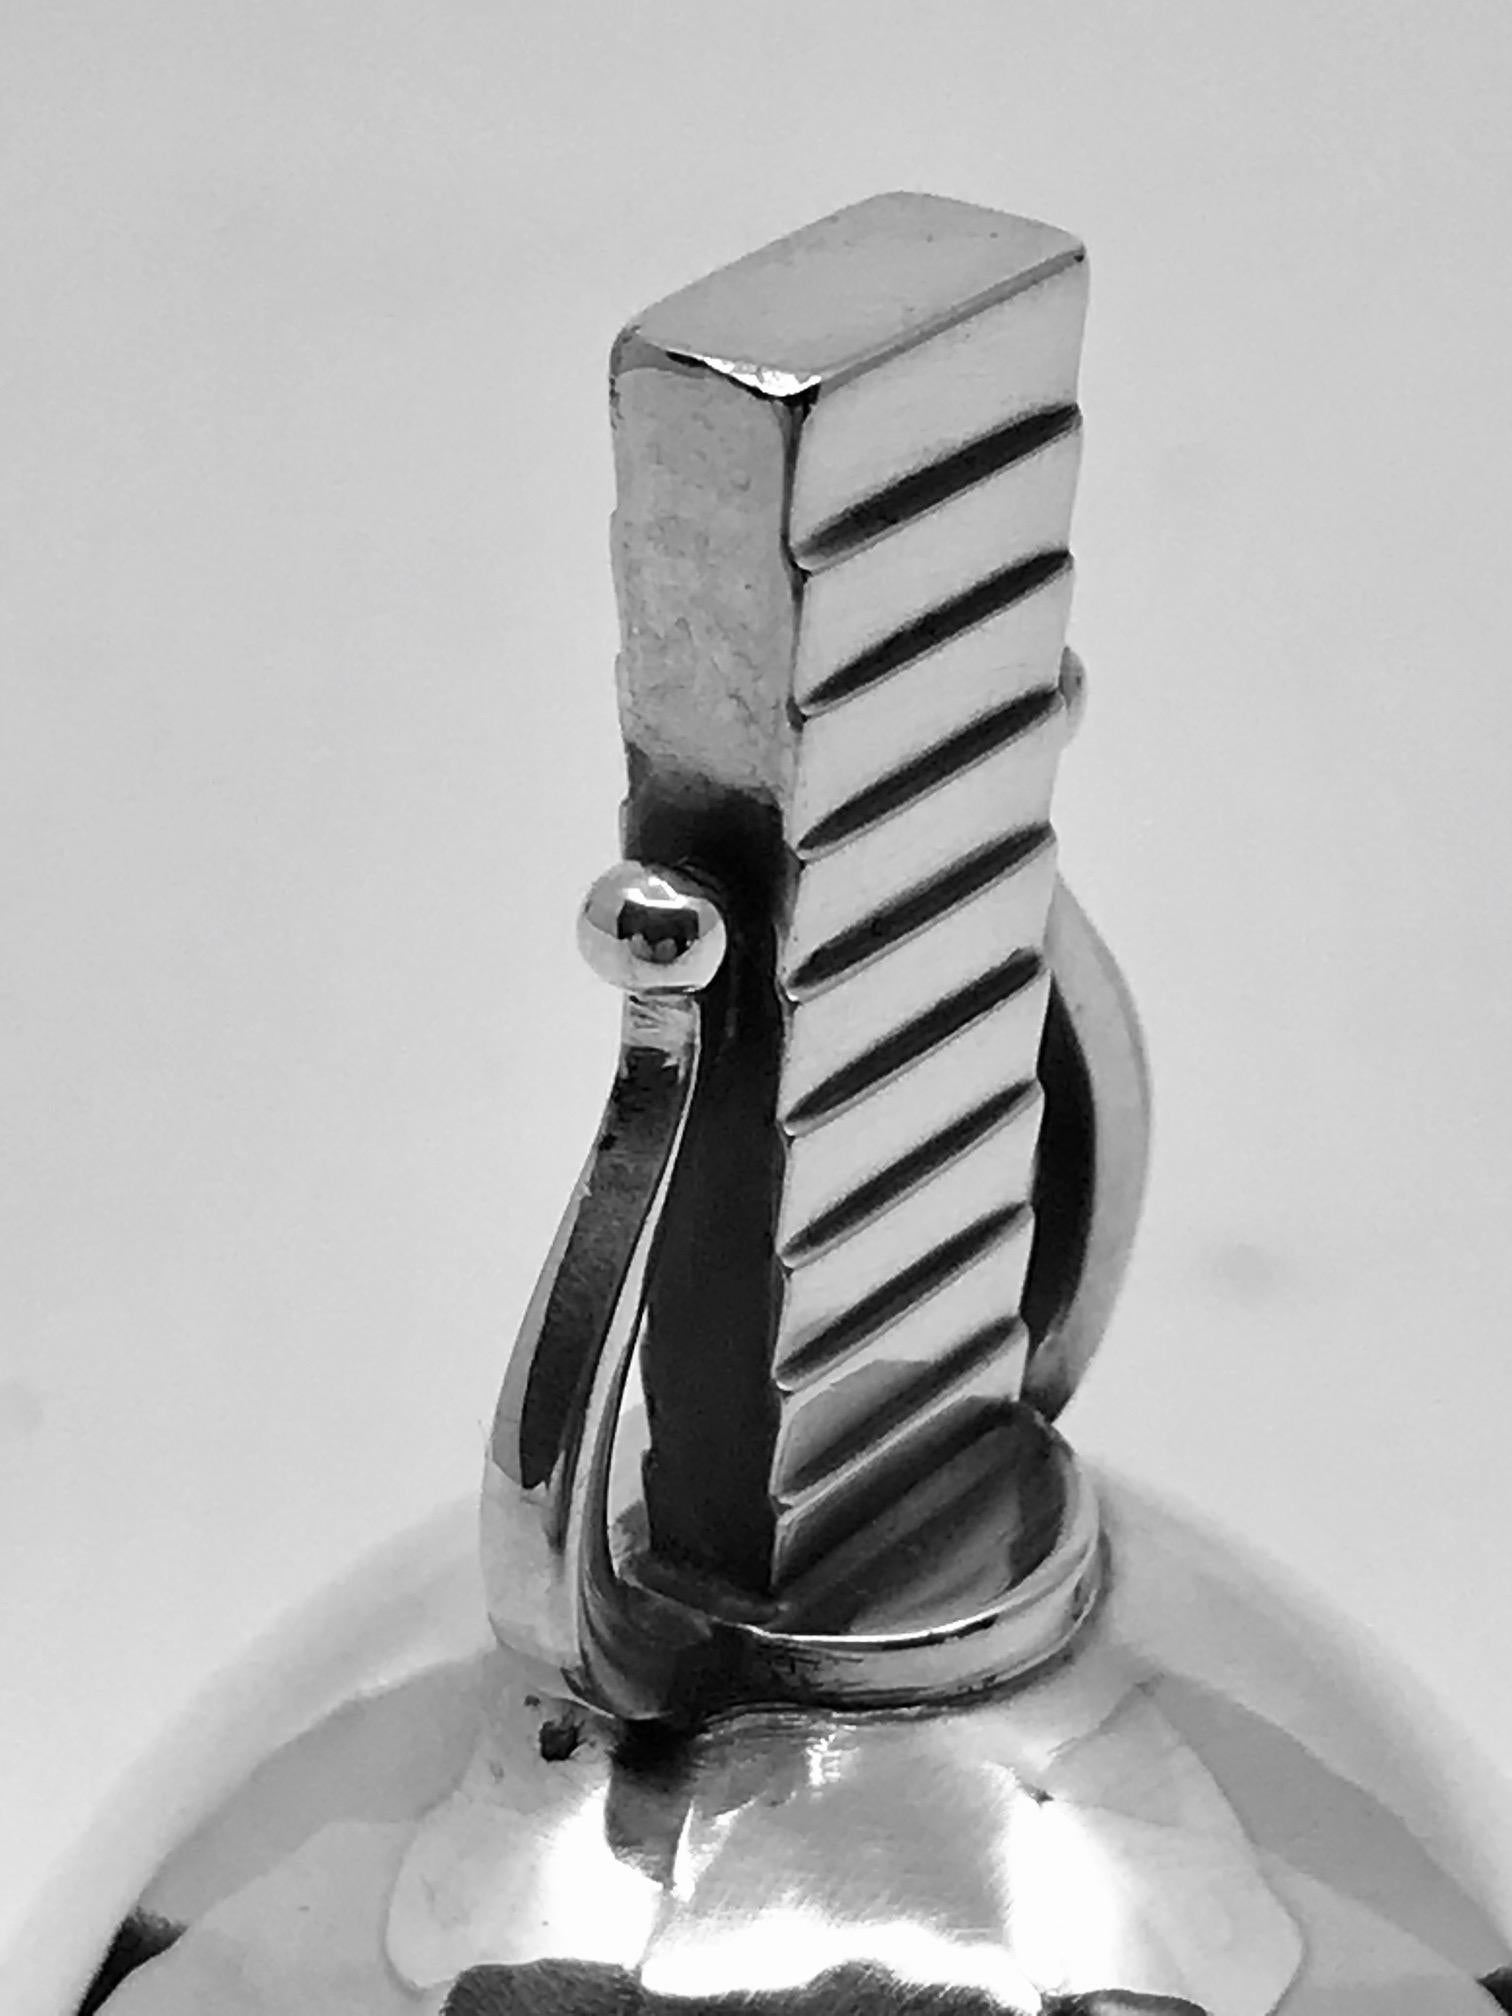 Sterling silver Georg Jensen table bell, design #247 by Oscar Gundlach-Pedersen, made to match his Parallel flatware pattern from 1931.

Measures 2 7/8? in height and has a diameter of 1 5/8? (7.3cm, 4cm).

Vintage Georg Jensen hallmark from